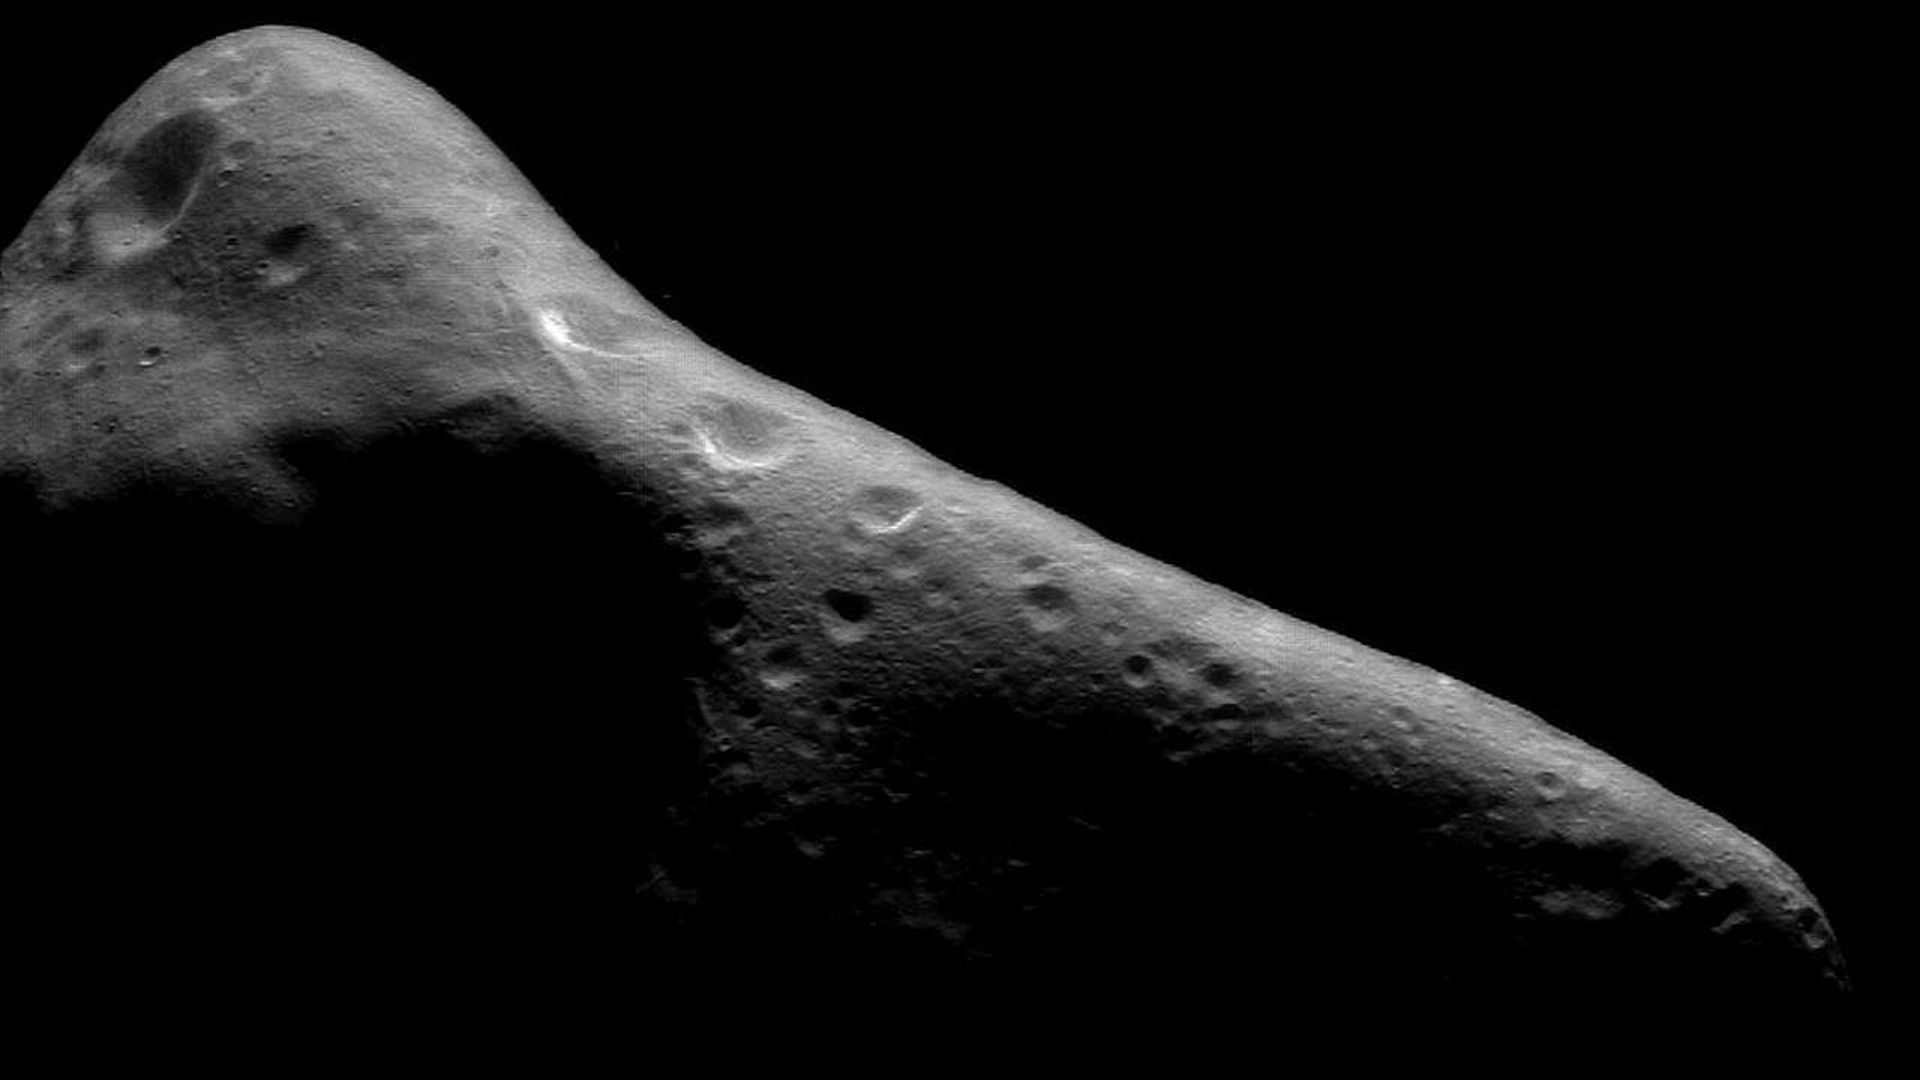 An asteroid seen in deep space